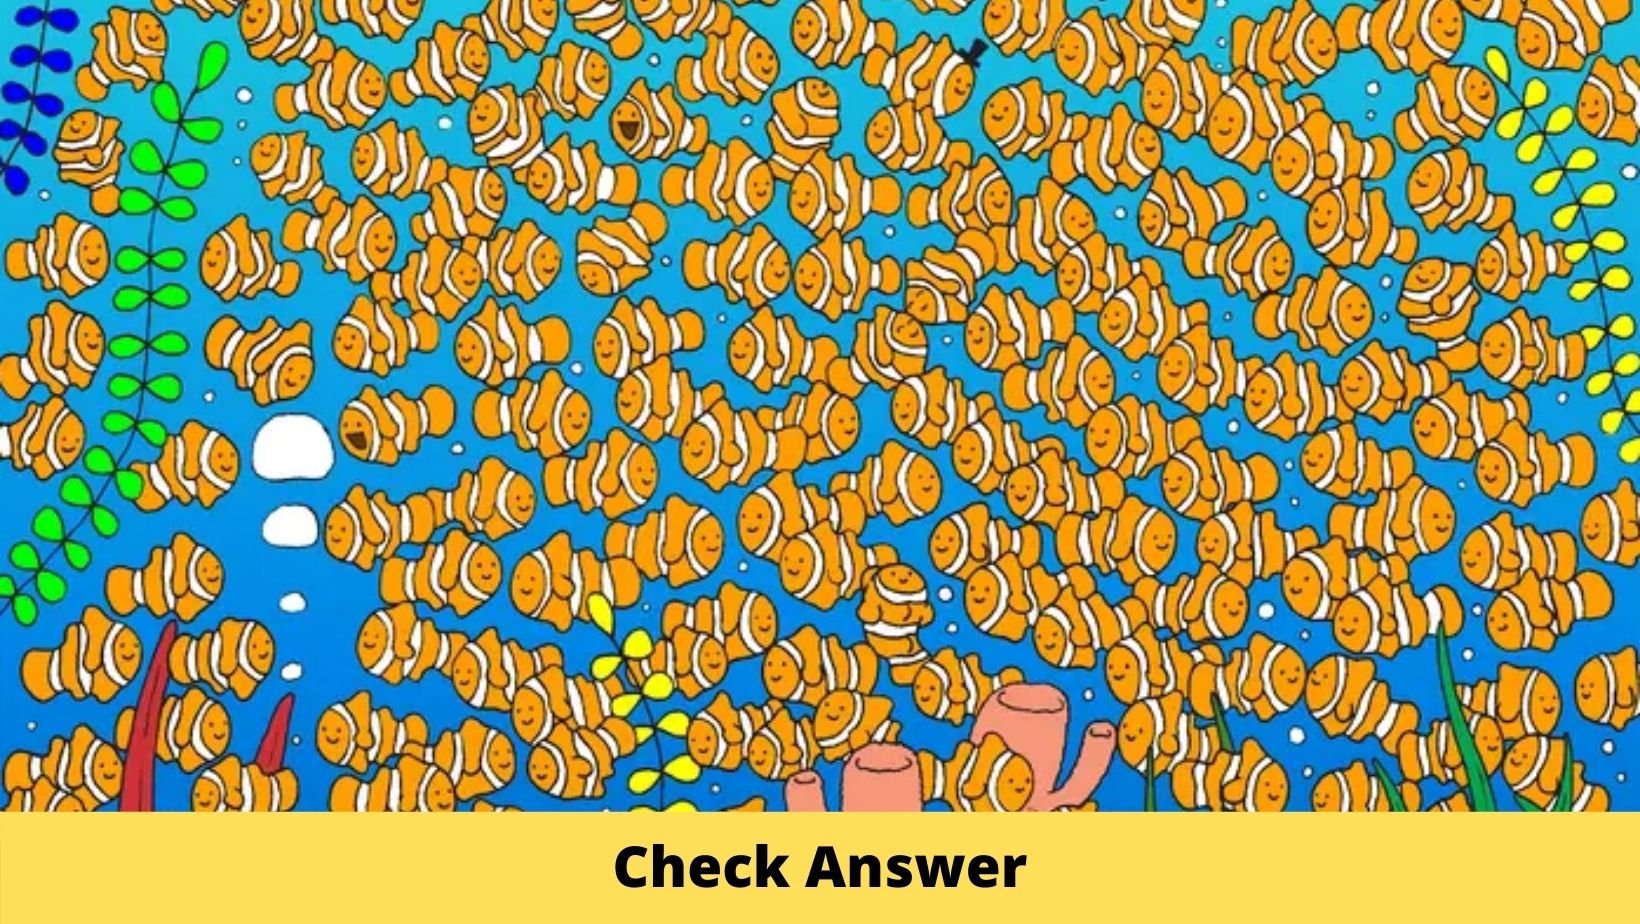 cover 21.jpg?resize=1200,630 - Finding Goldie: There's A GOLD FISH Among The Clown Fishes Below, Can You Spot It?